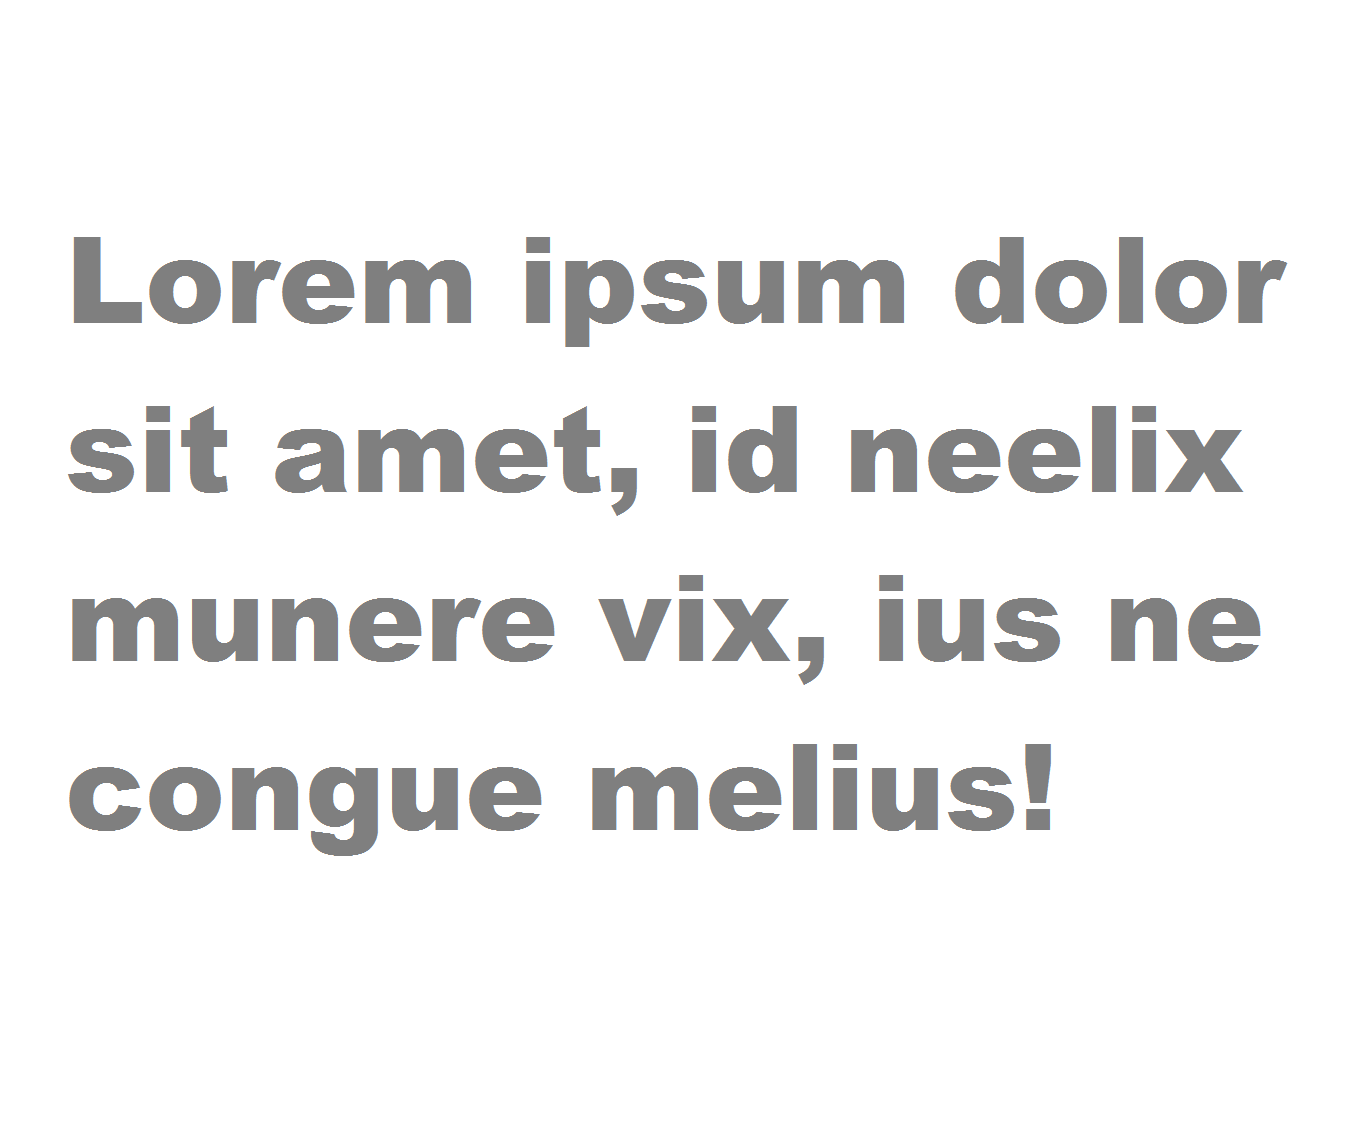 Placeholder with some random Latin text